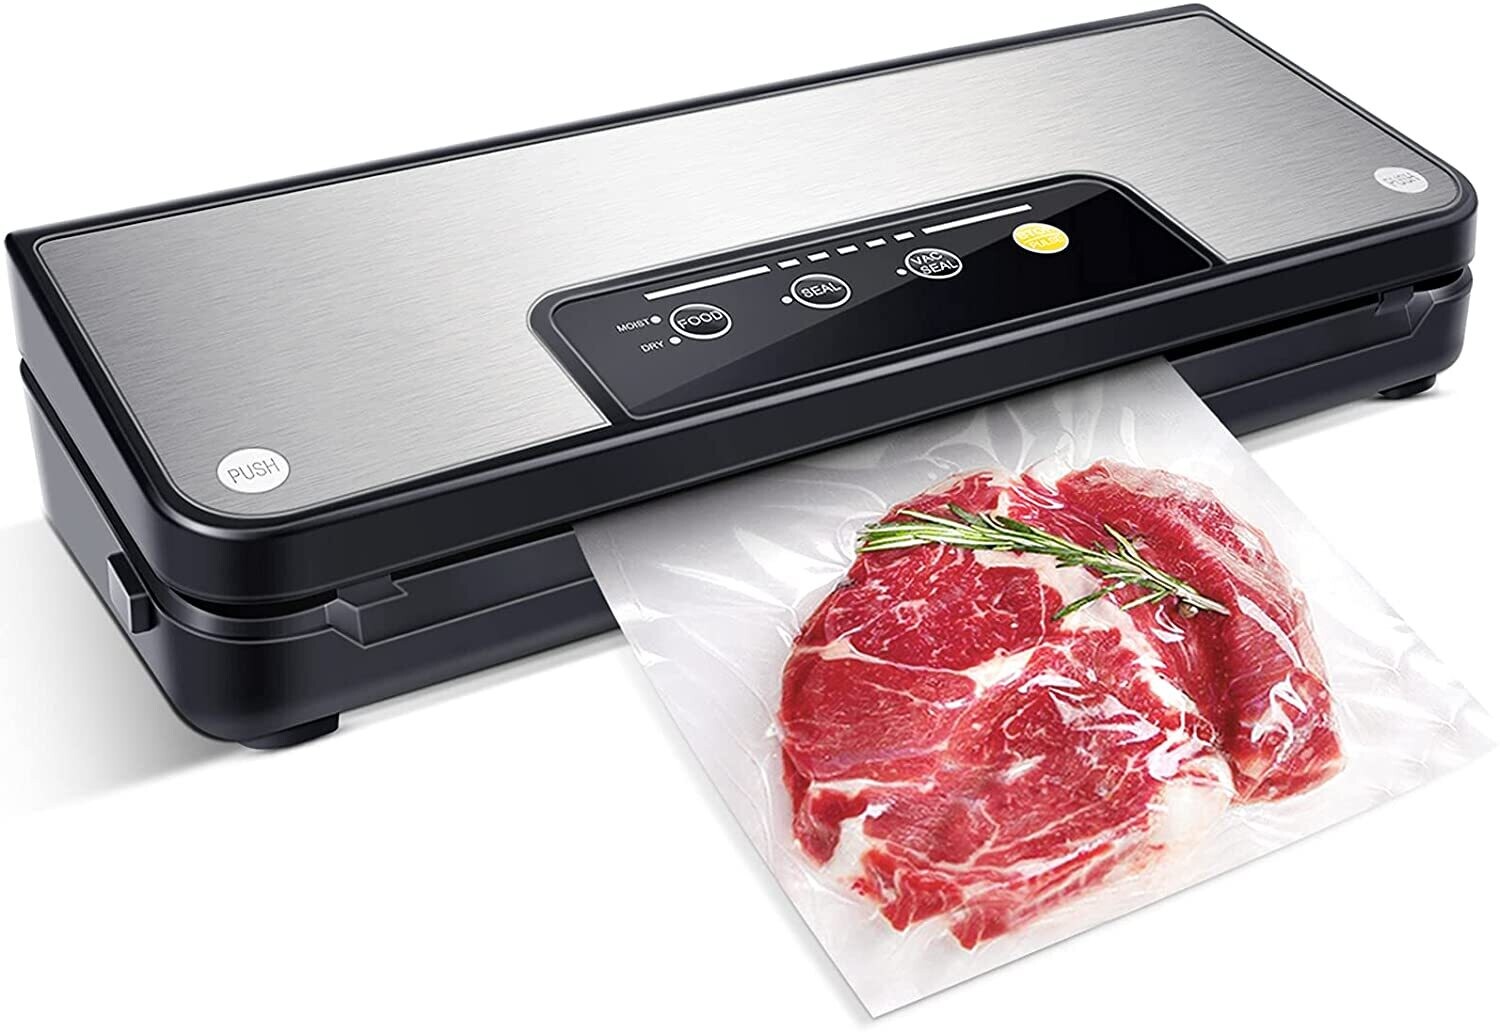 Stainless Steel Vacuum Sealer Foil Sealer for Dry and Wet Food